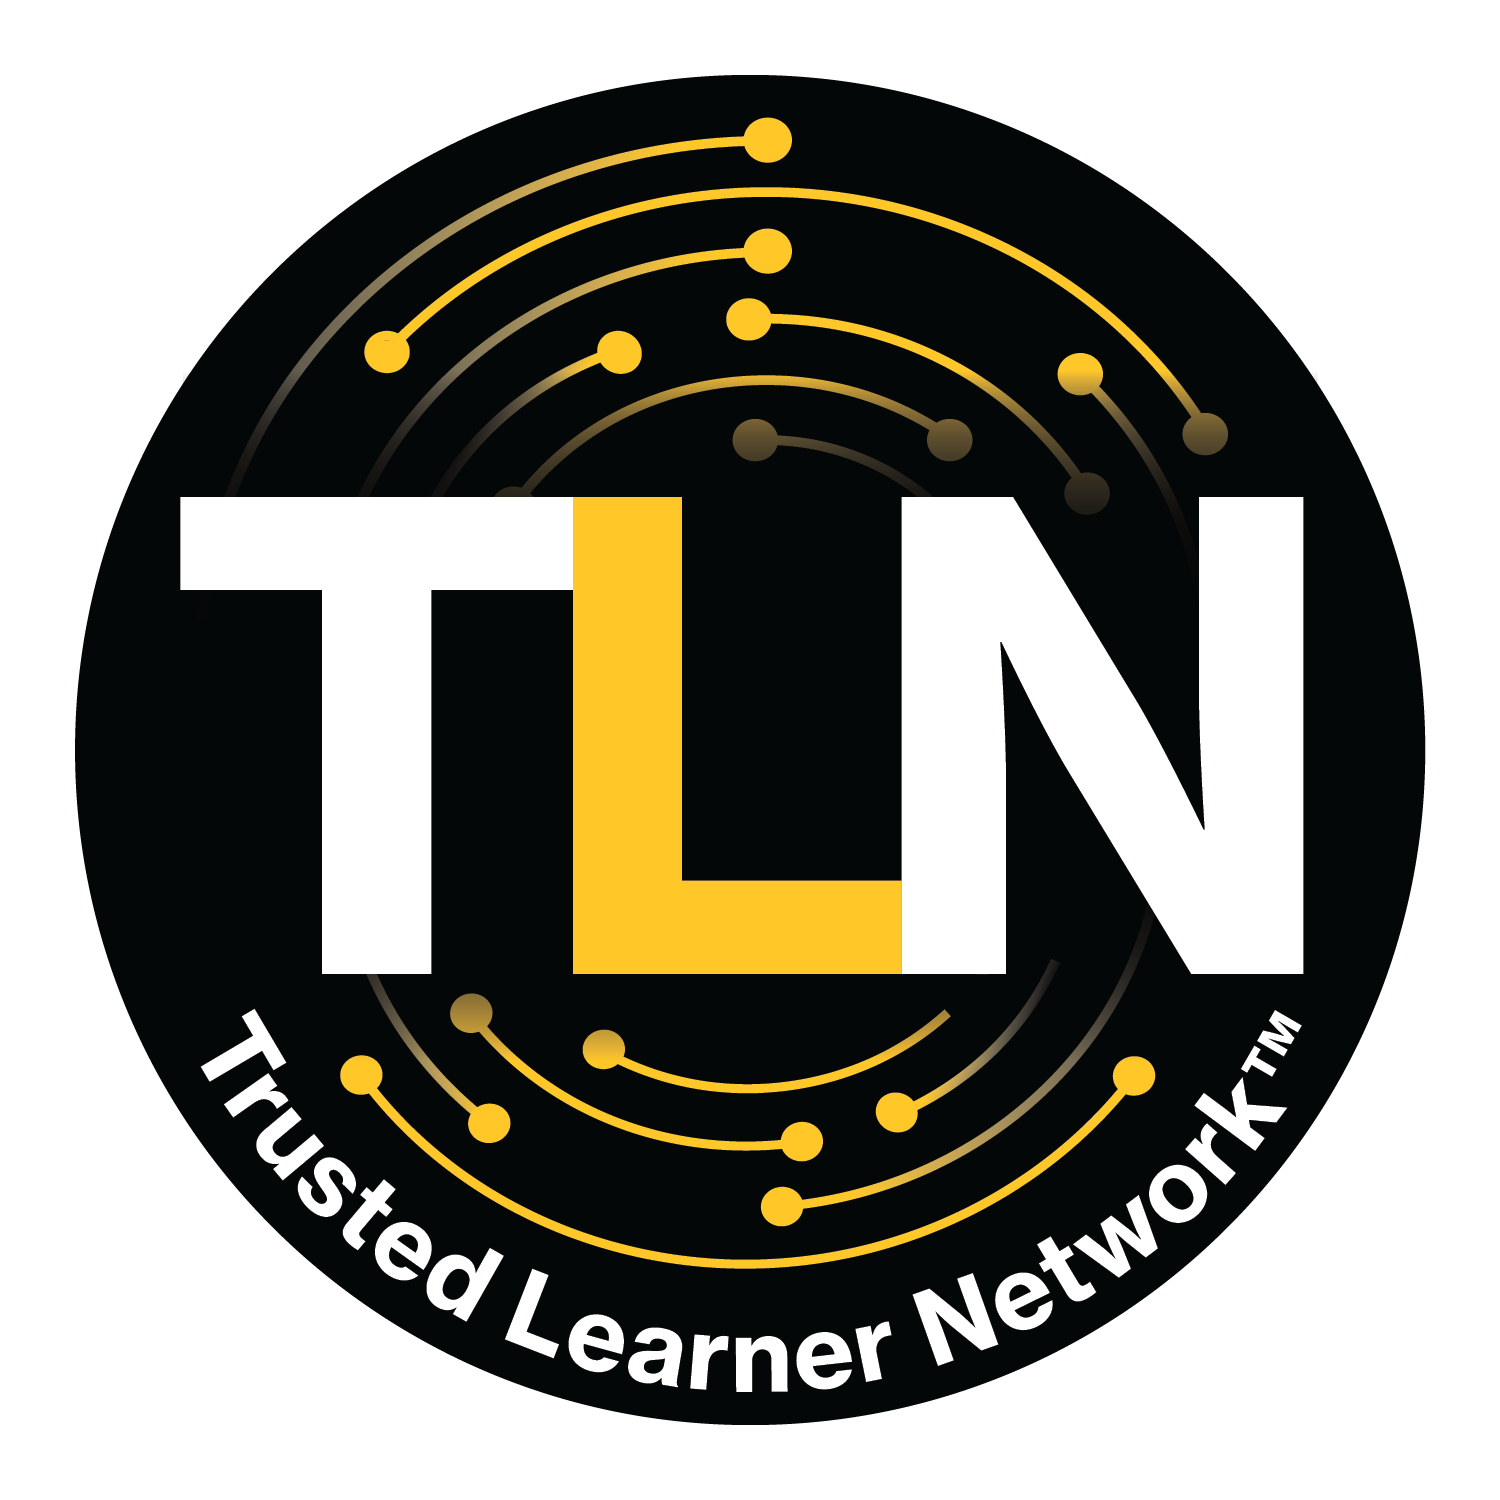 Trusted Learner Network